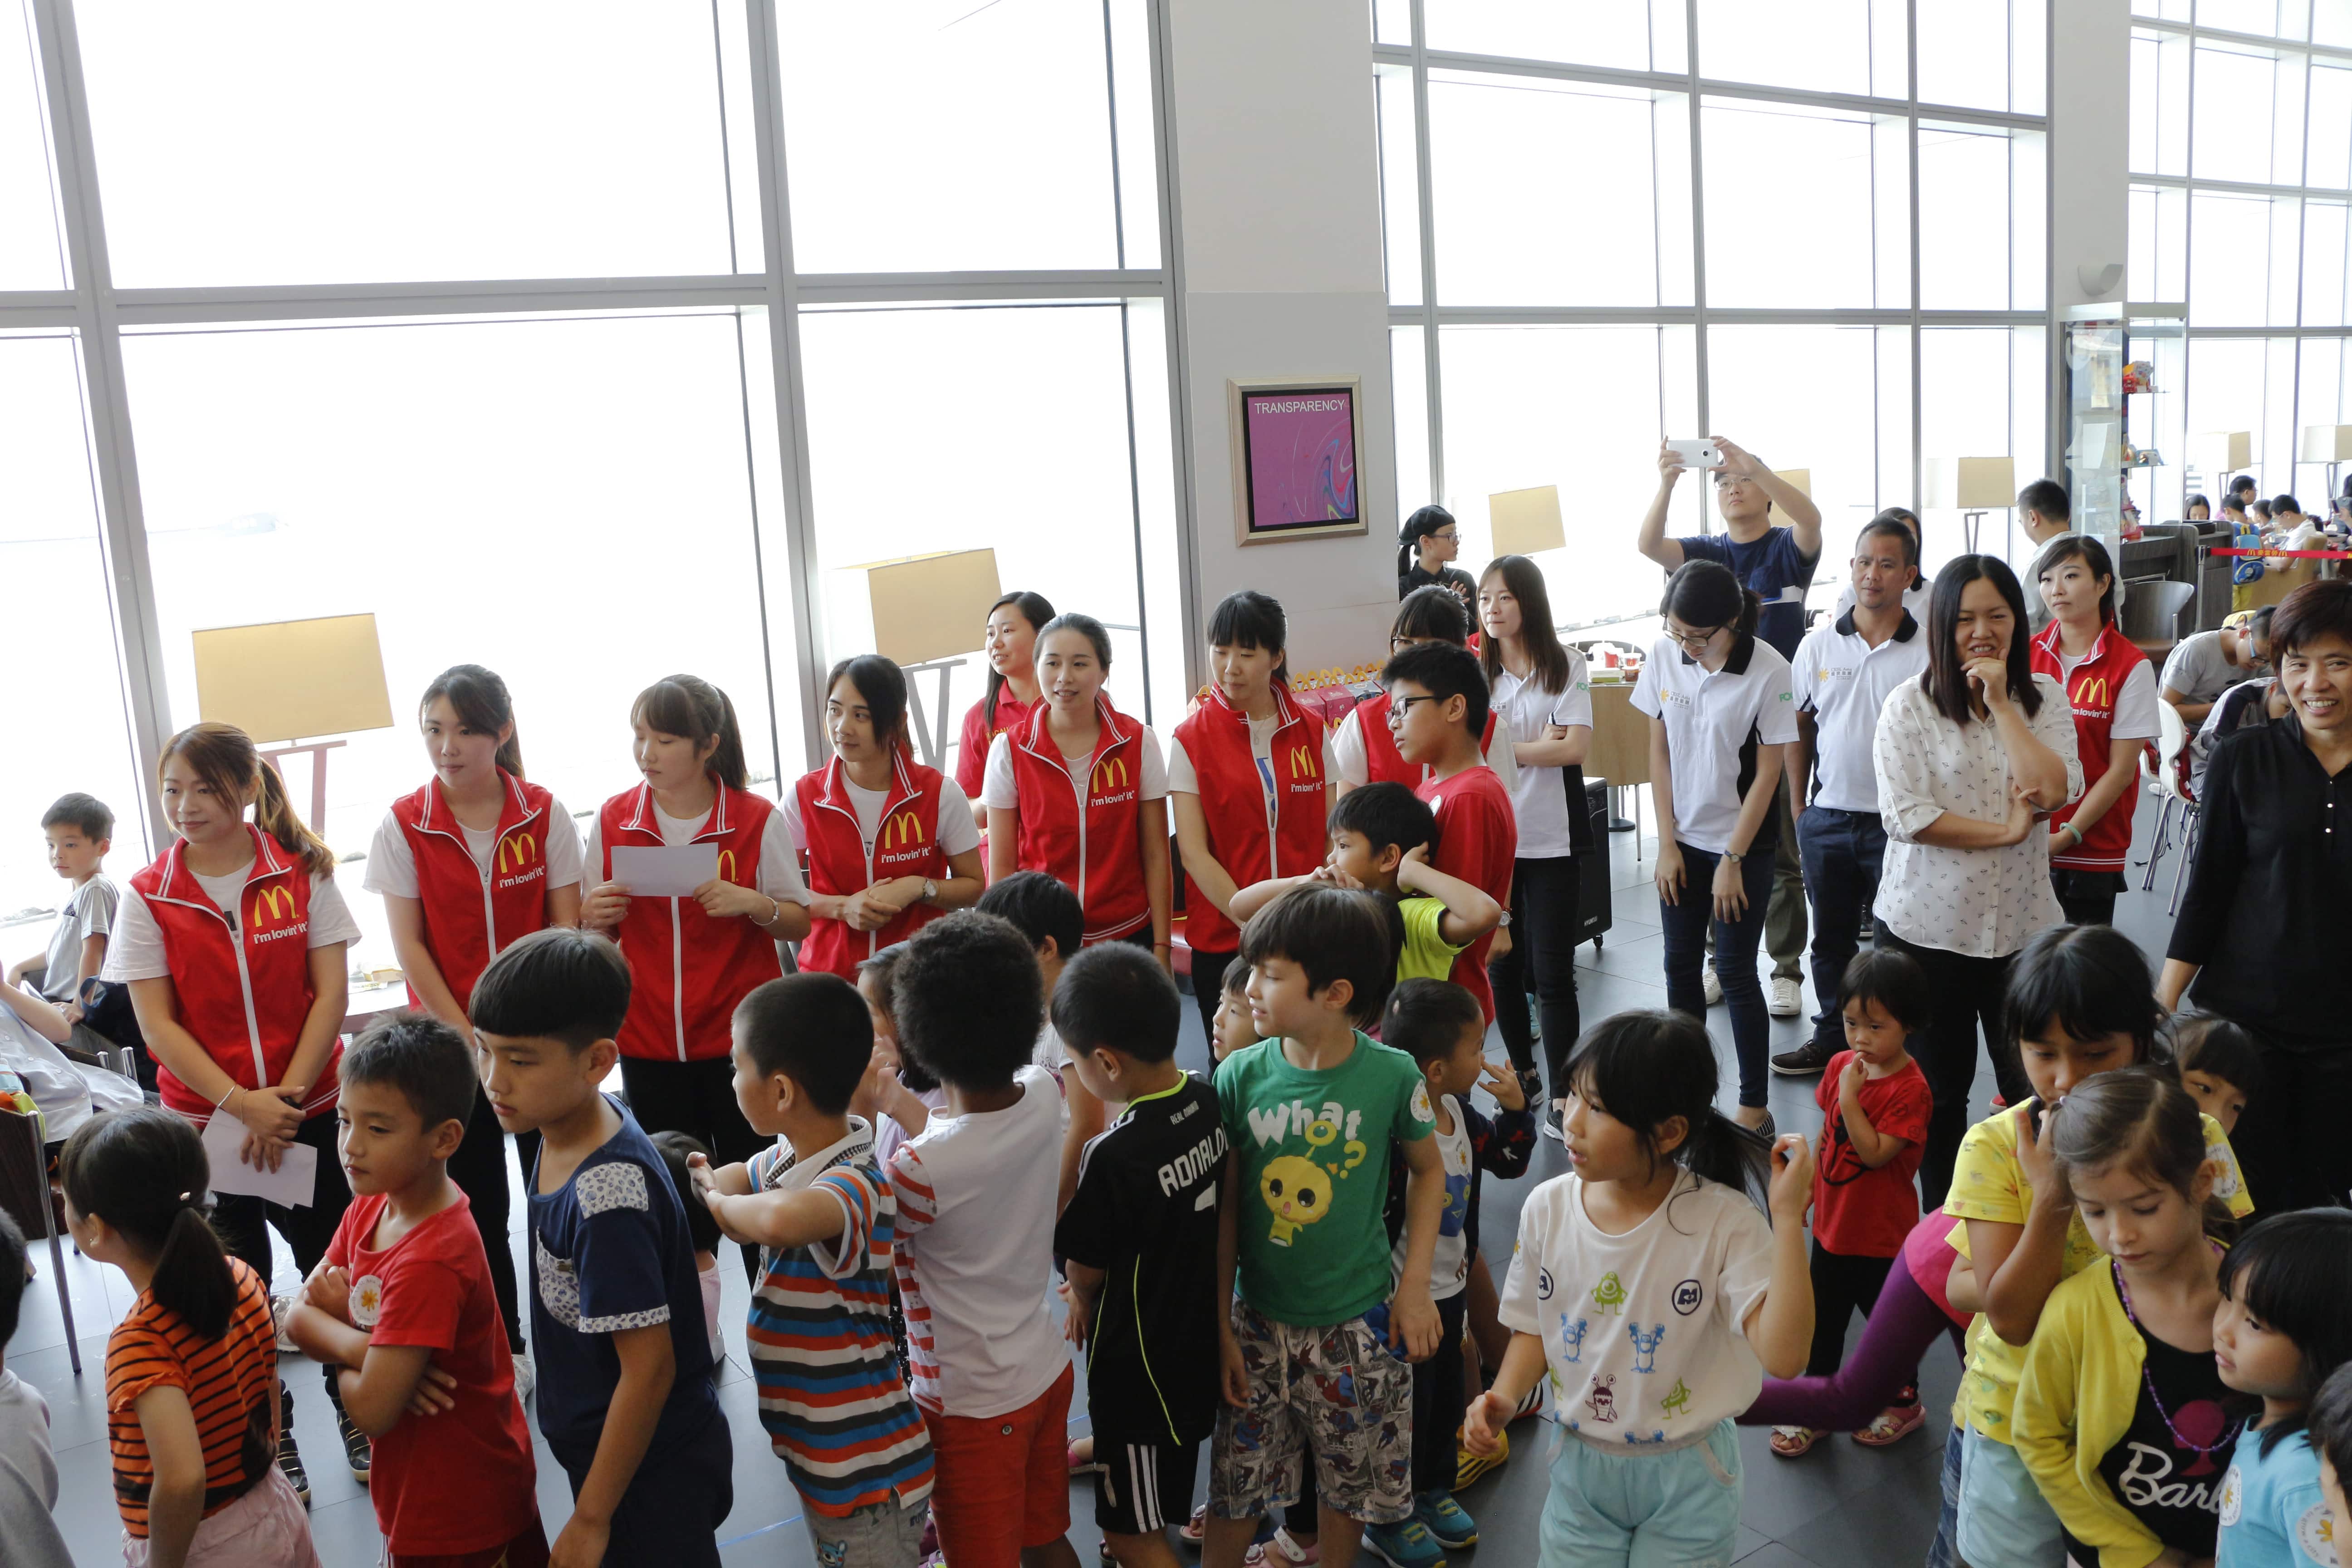 CESL Asia’s Kids Movie Day Ignited the Summer for the Less Advantaged Children